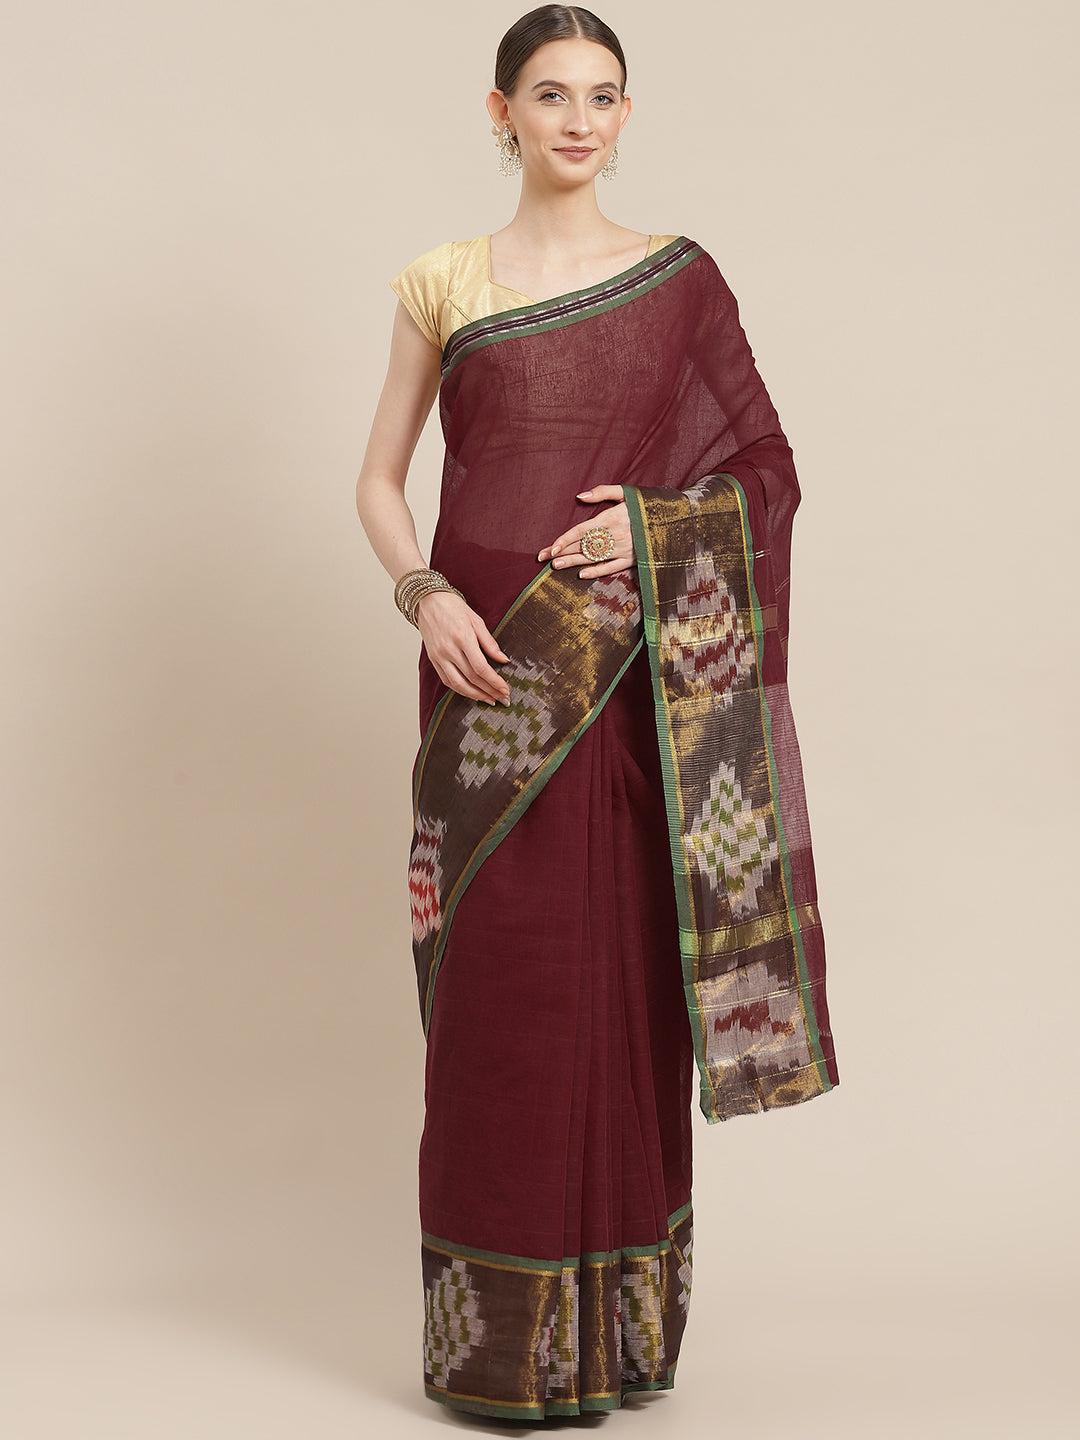 ishin-women's-cotton-blend-maroon-solid-woven-pochampally-saree-with-blouse-piece